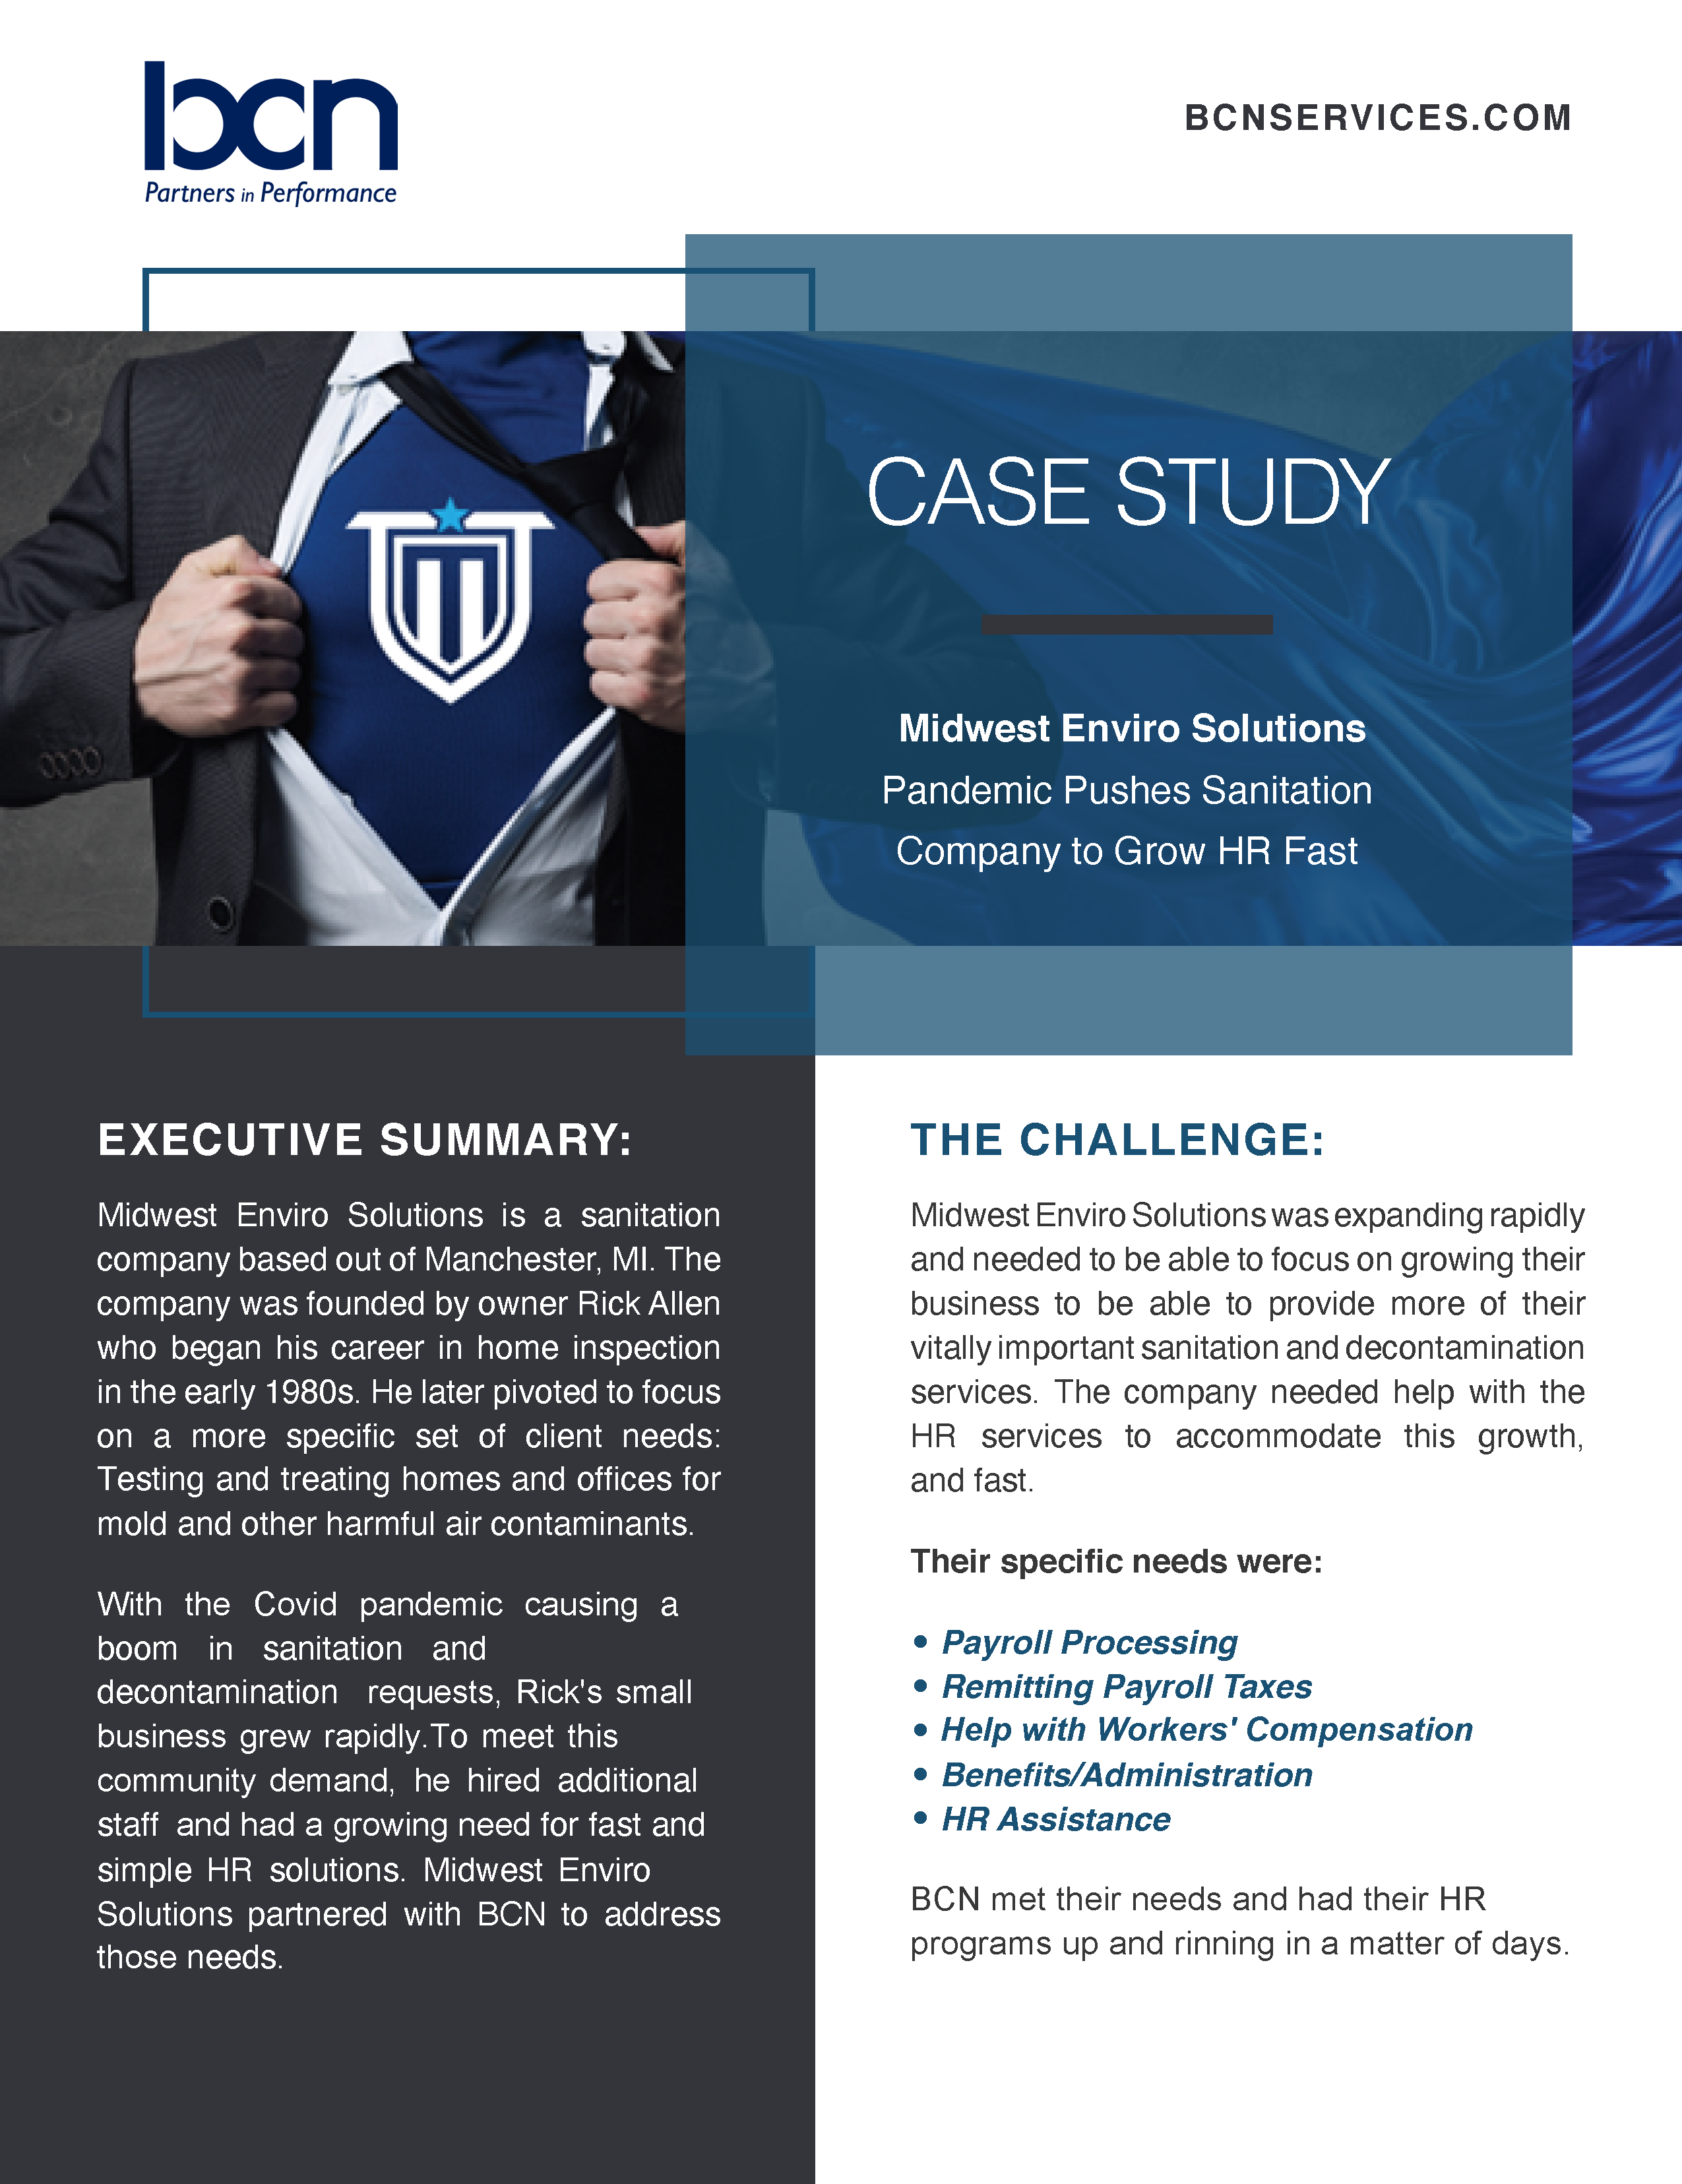 BCNServices_CaseStudy_MidwestEnviorSolutions_v1_051821_Page_1